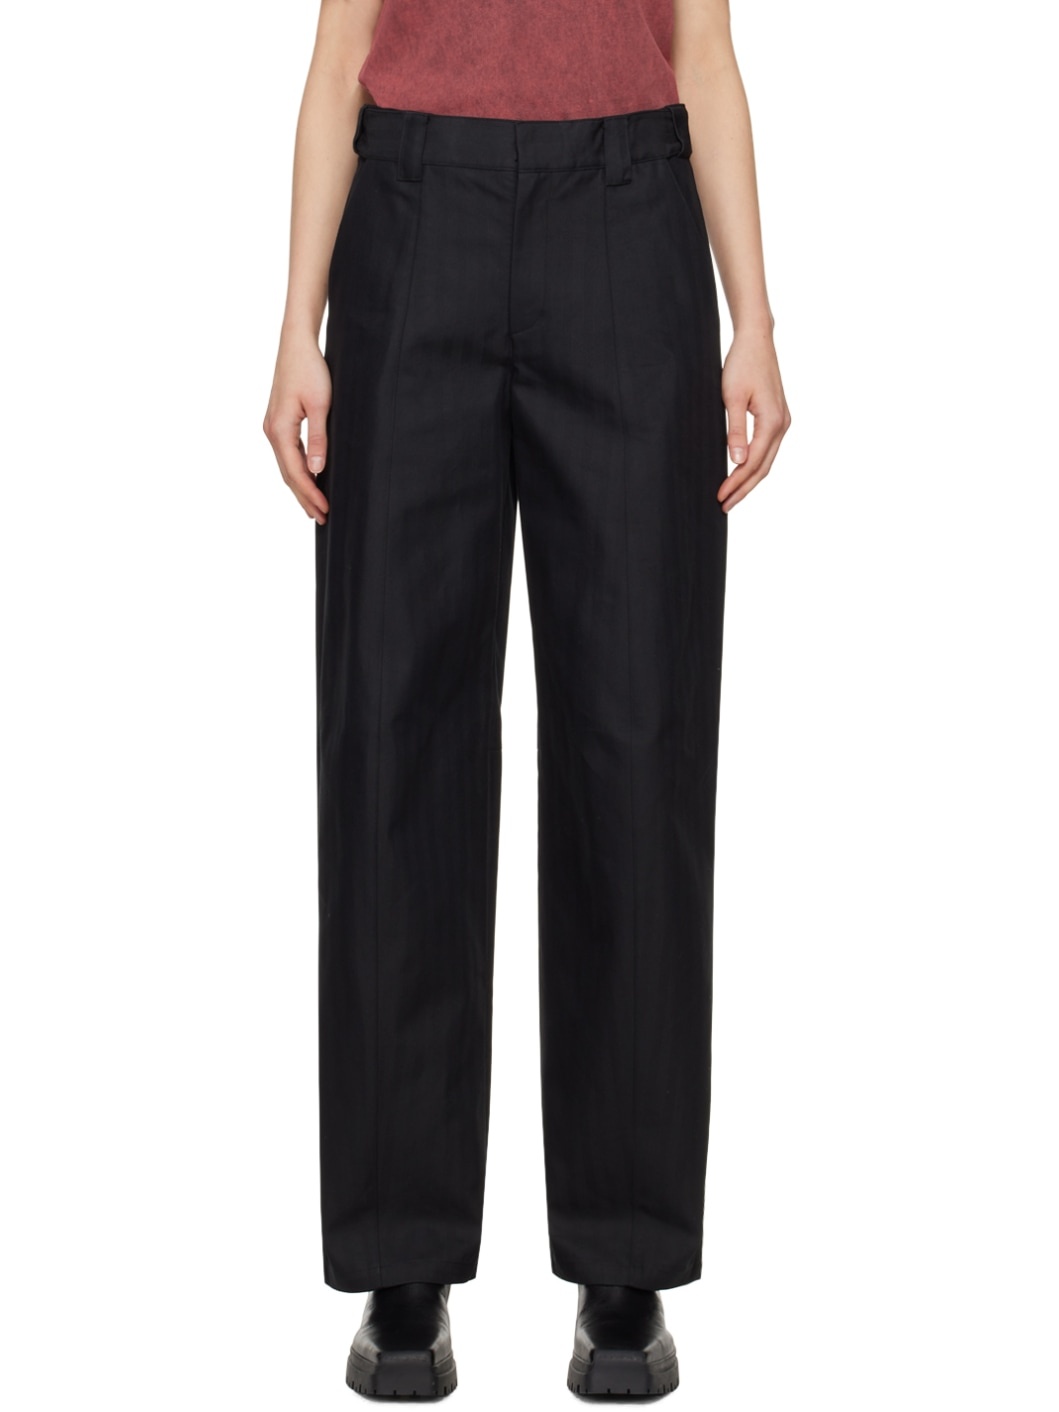 Black Tailored Trousers - 1